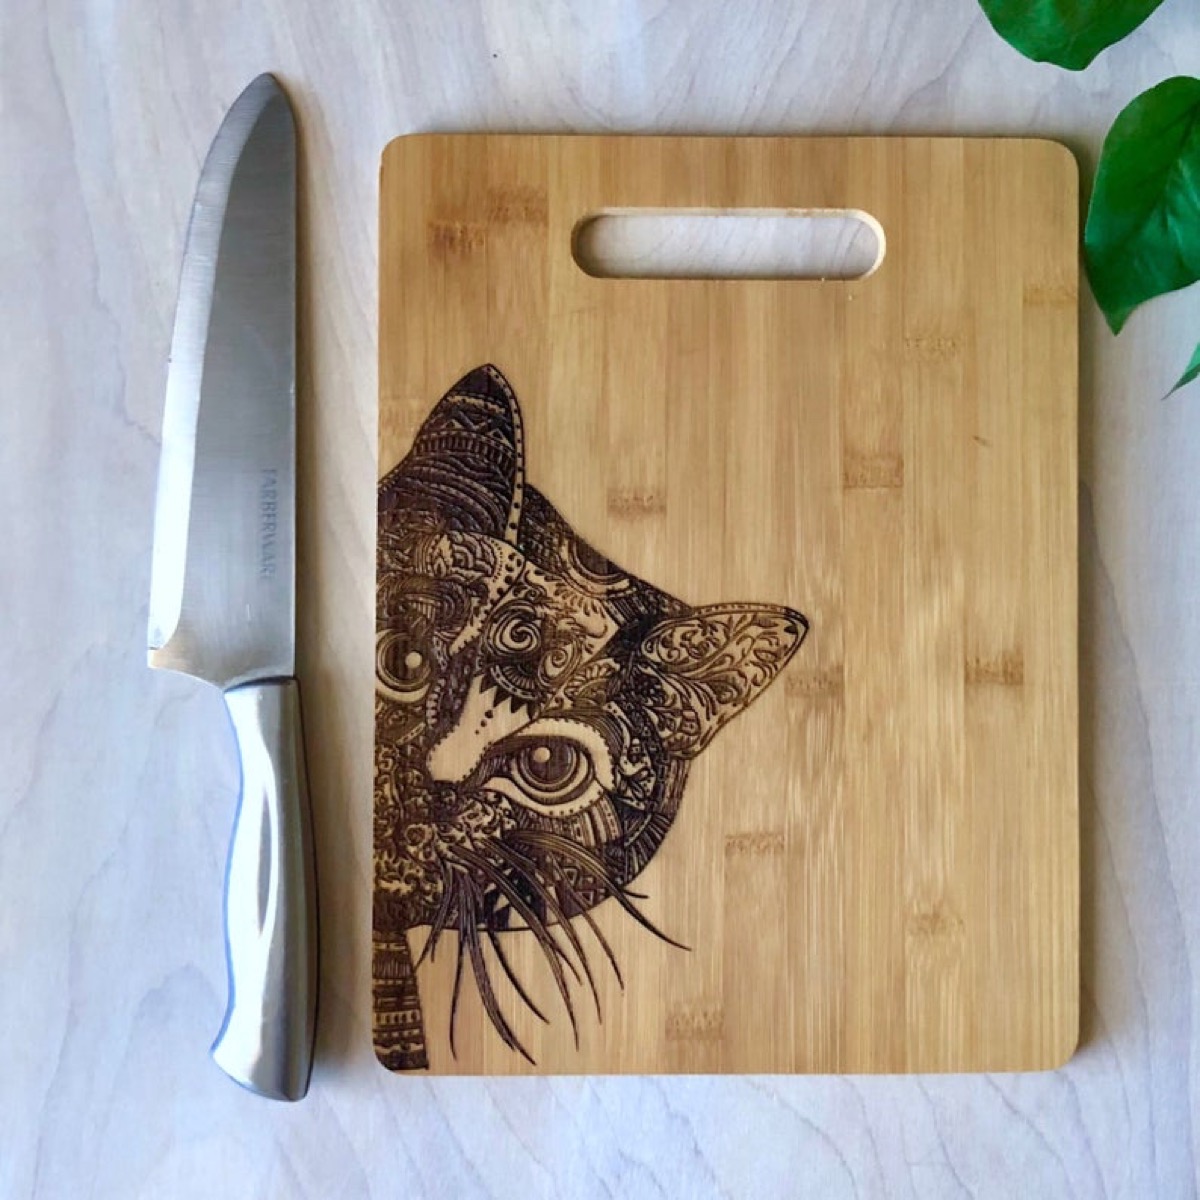 cutting board with cat etched into it, cat gifts